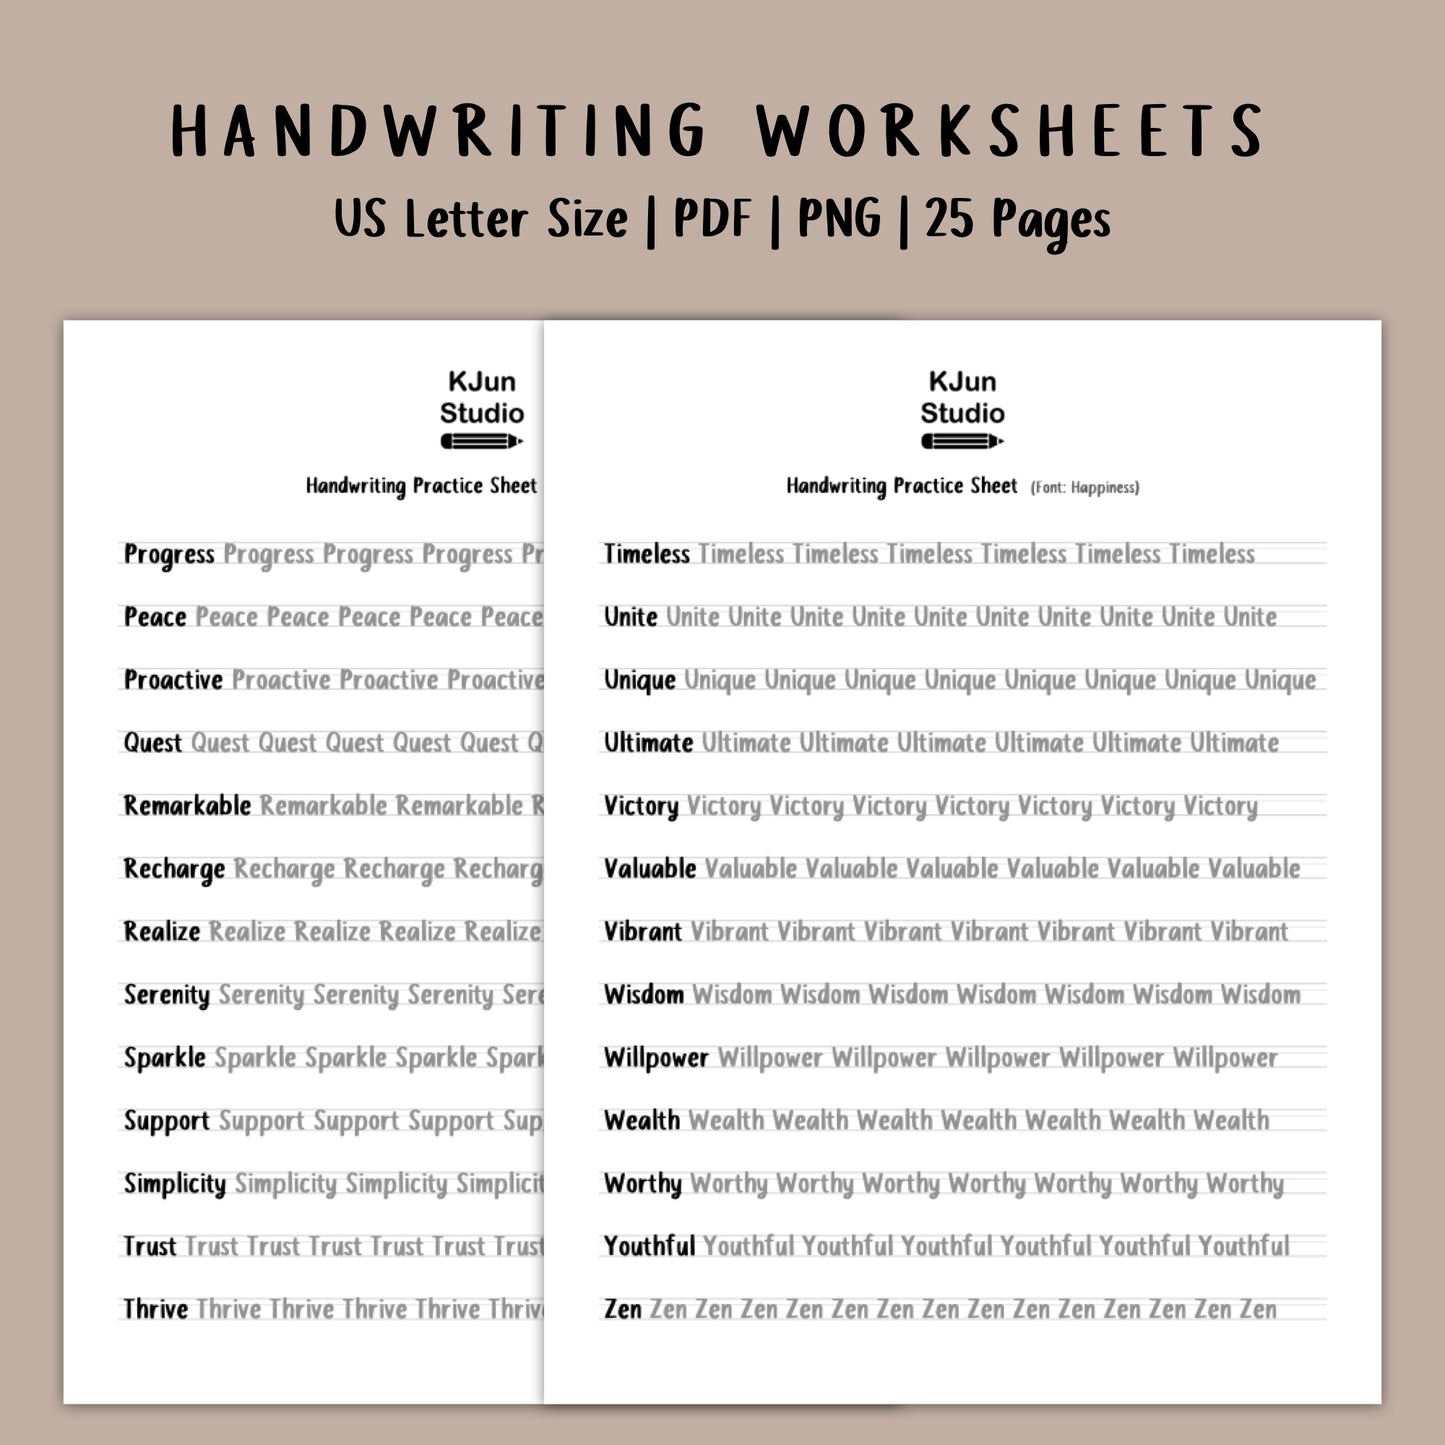 Handwriting Practice Sheets - Happiness Font